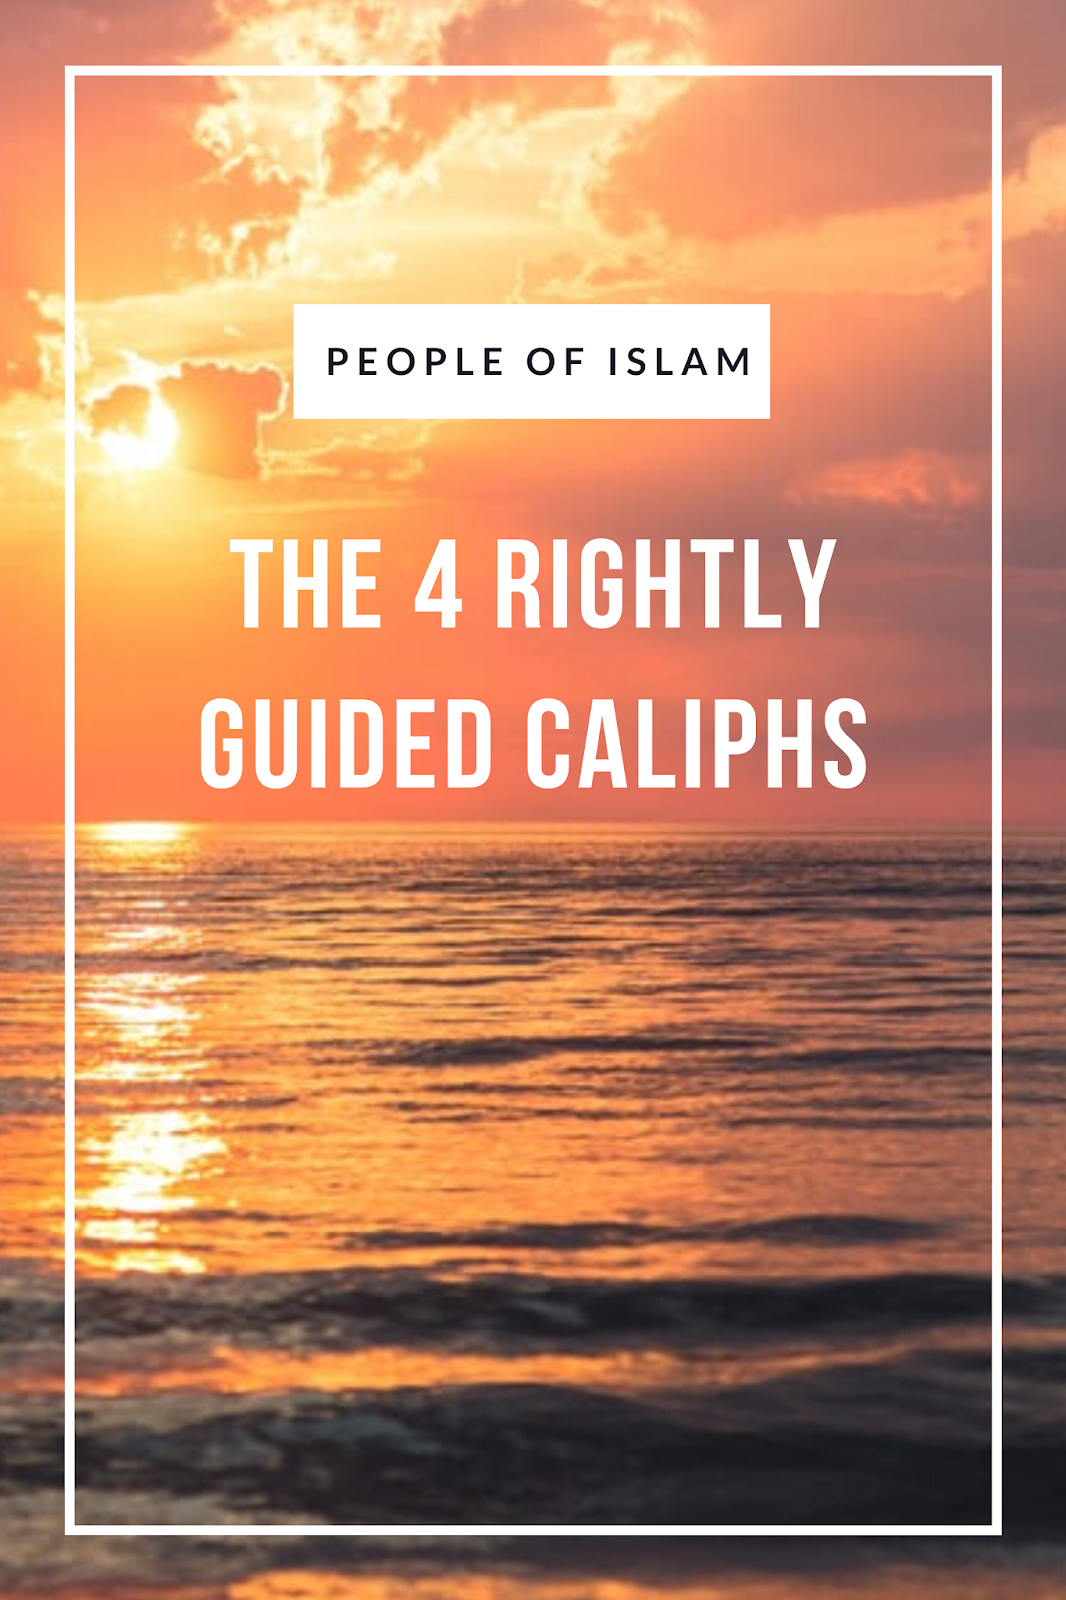 rightly guided caliphs